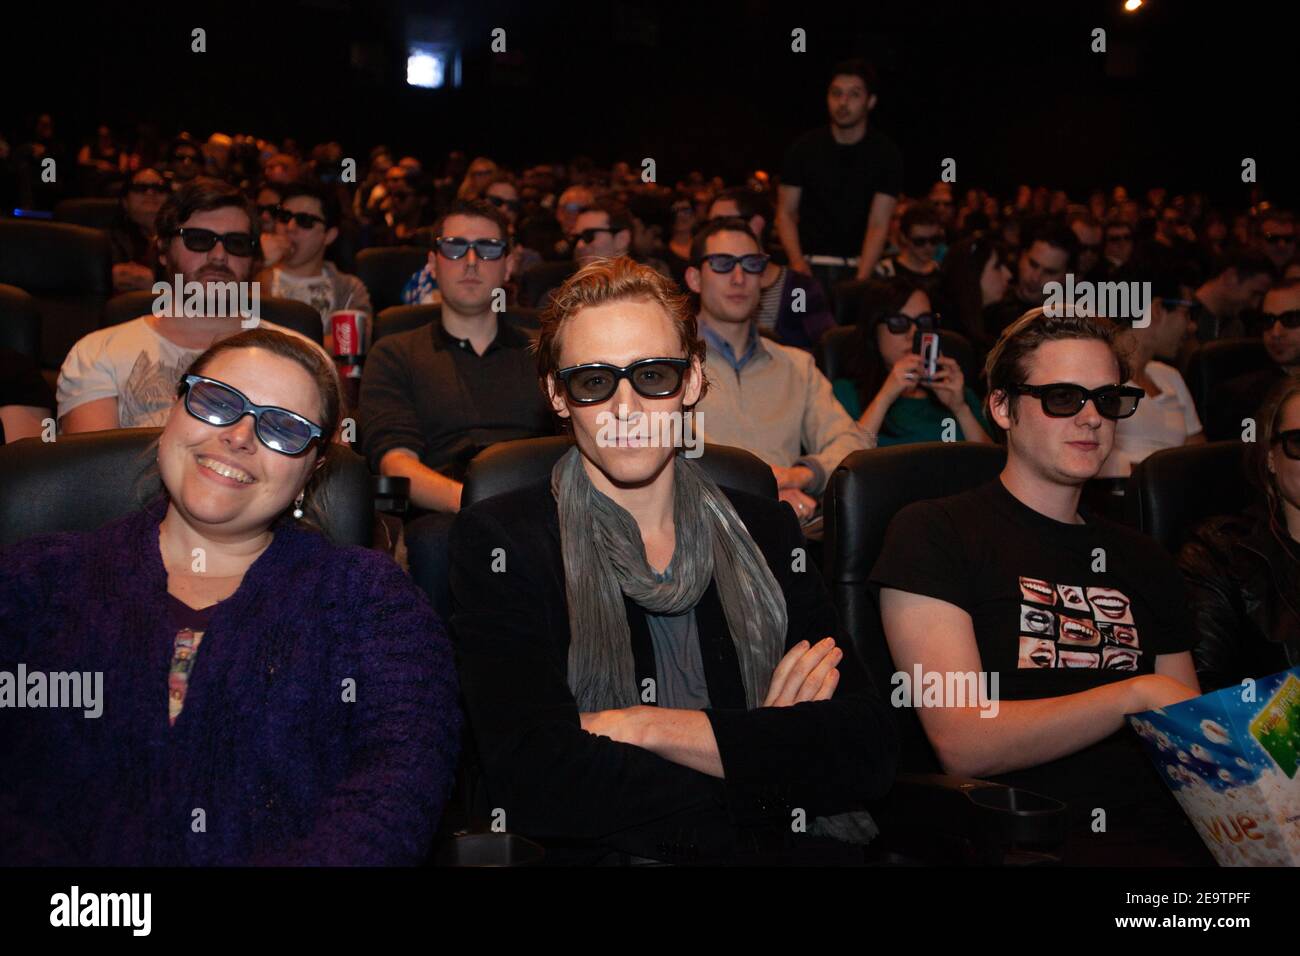 Tom Hiddleston at Vue Cinema Extreme sitting in 3D glasses Stock Photo -  Alamy